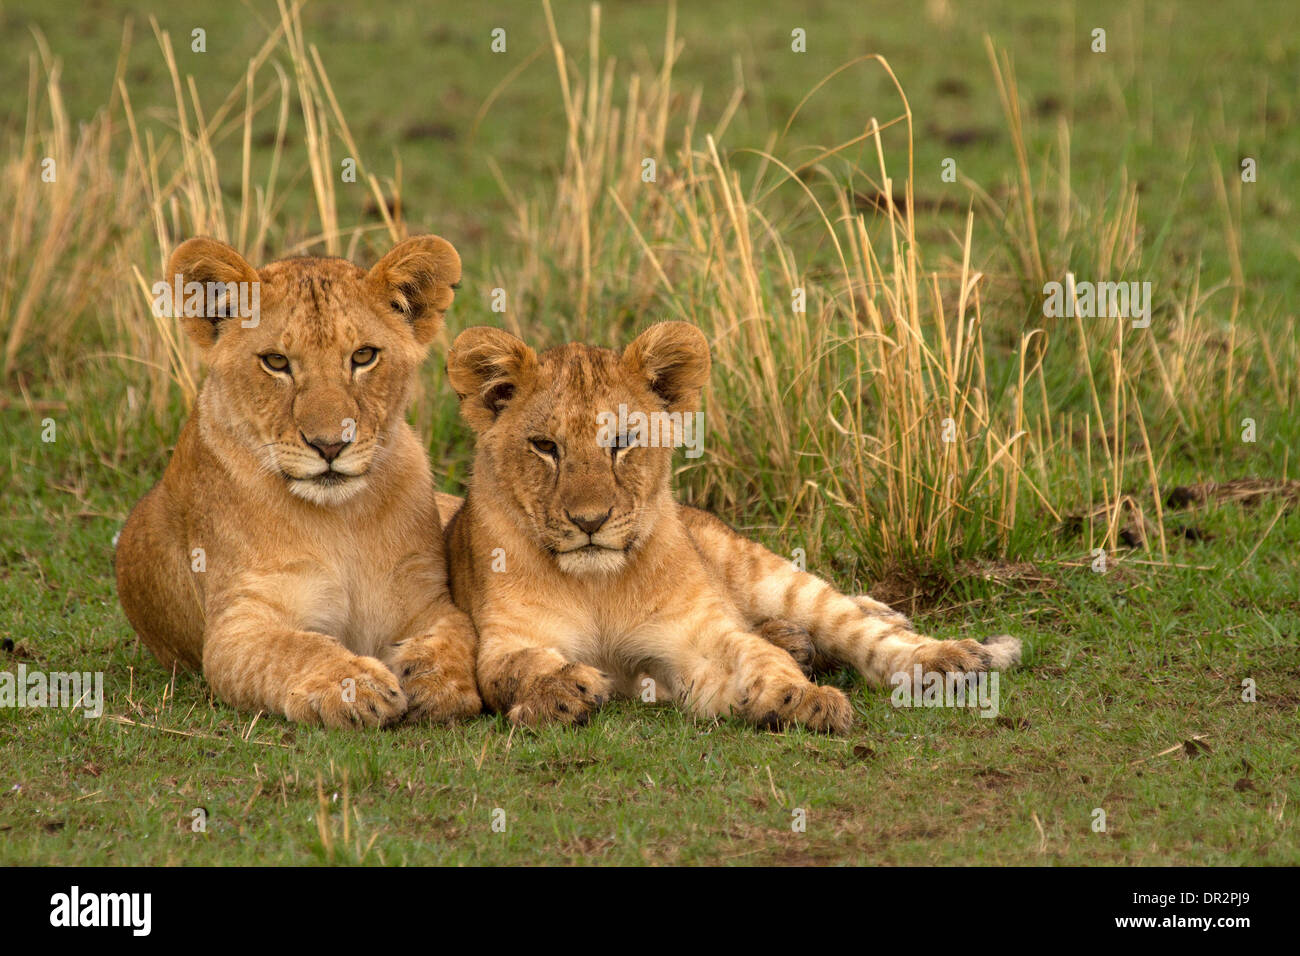 Lion cubs, Leo panthera sitting together Stock Photo